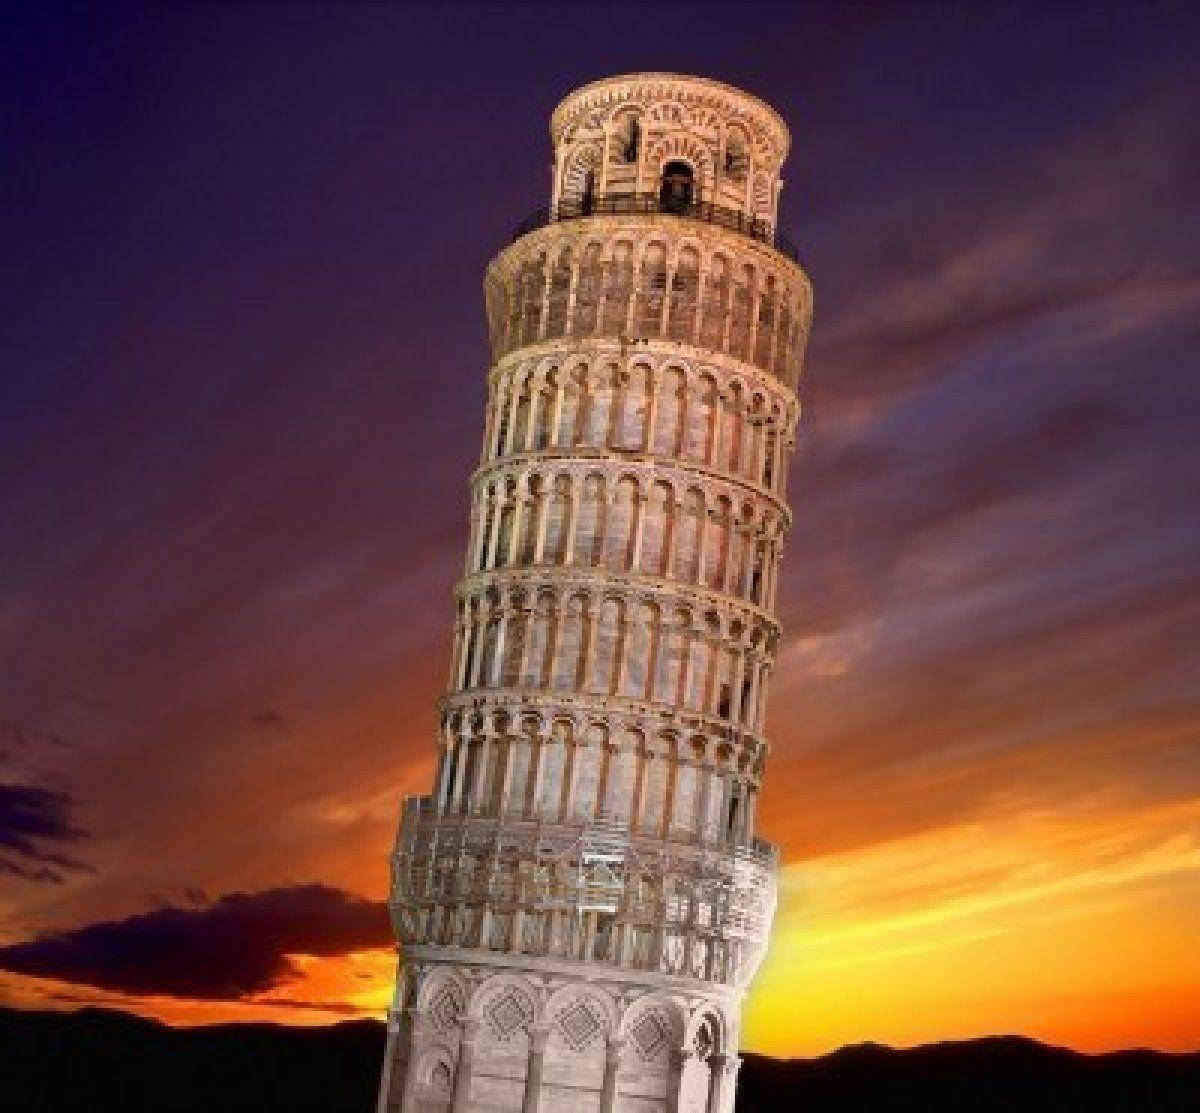 Leaning Tower Of Pisa During Sunset Wallpaper